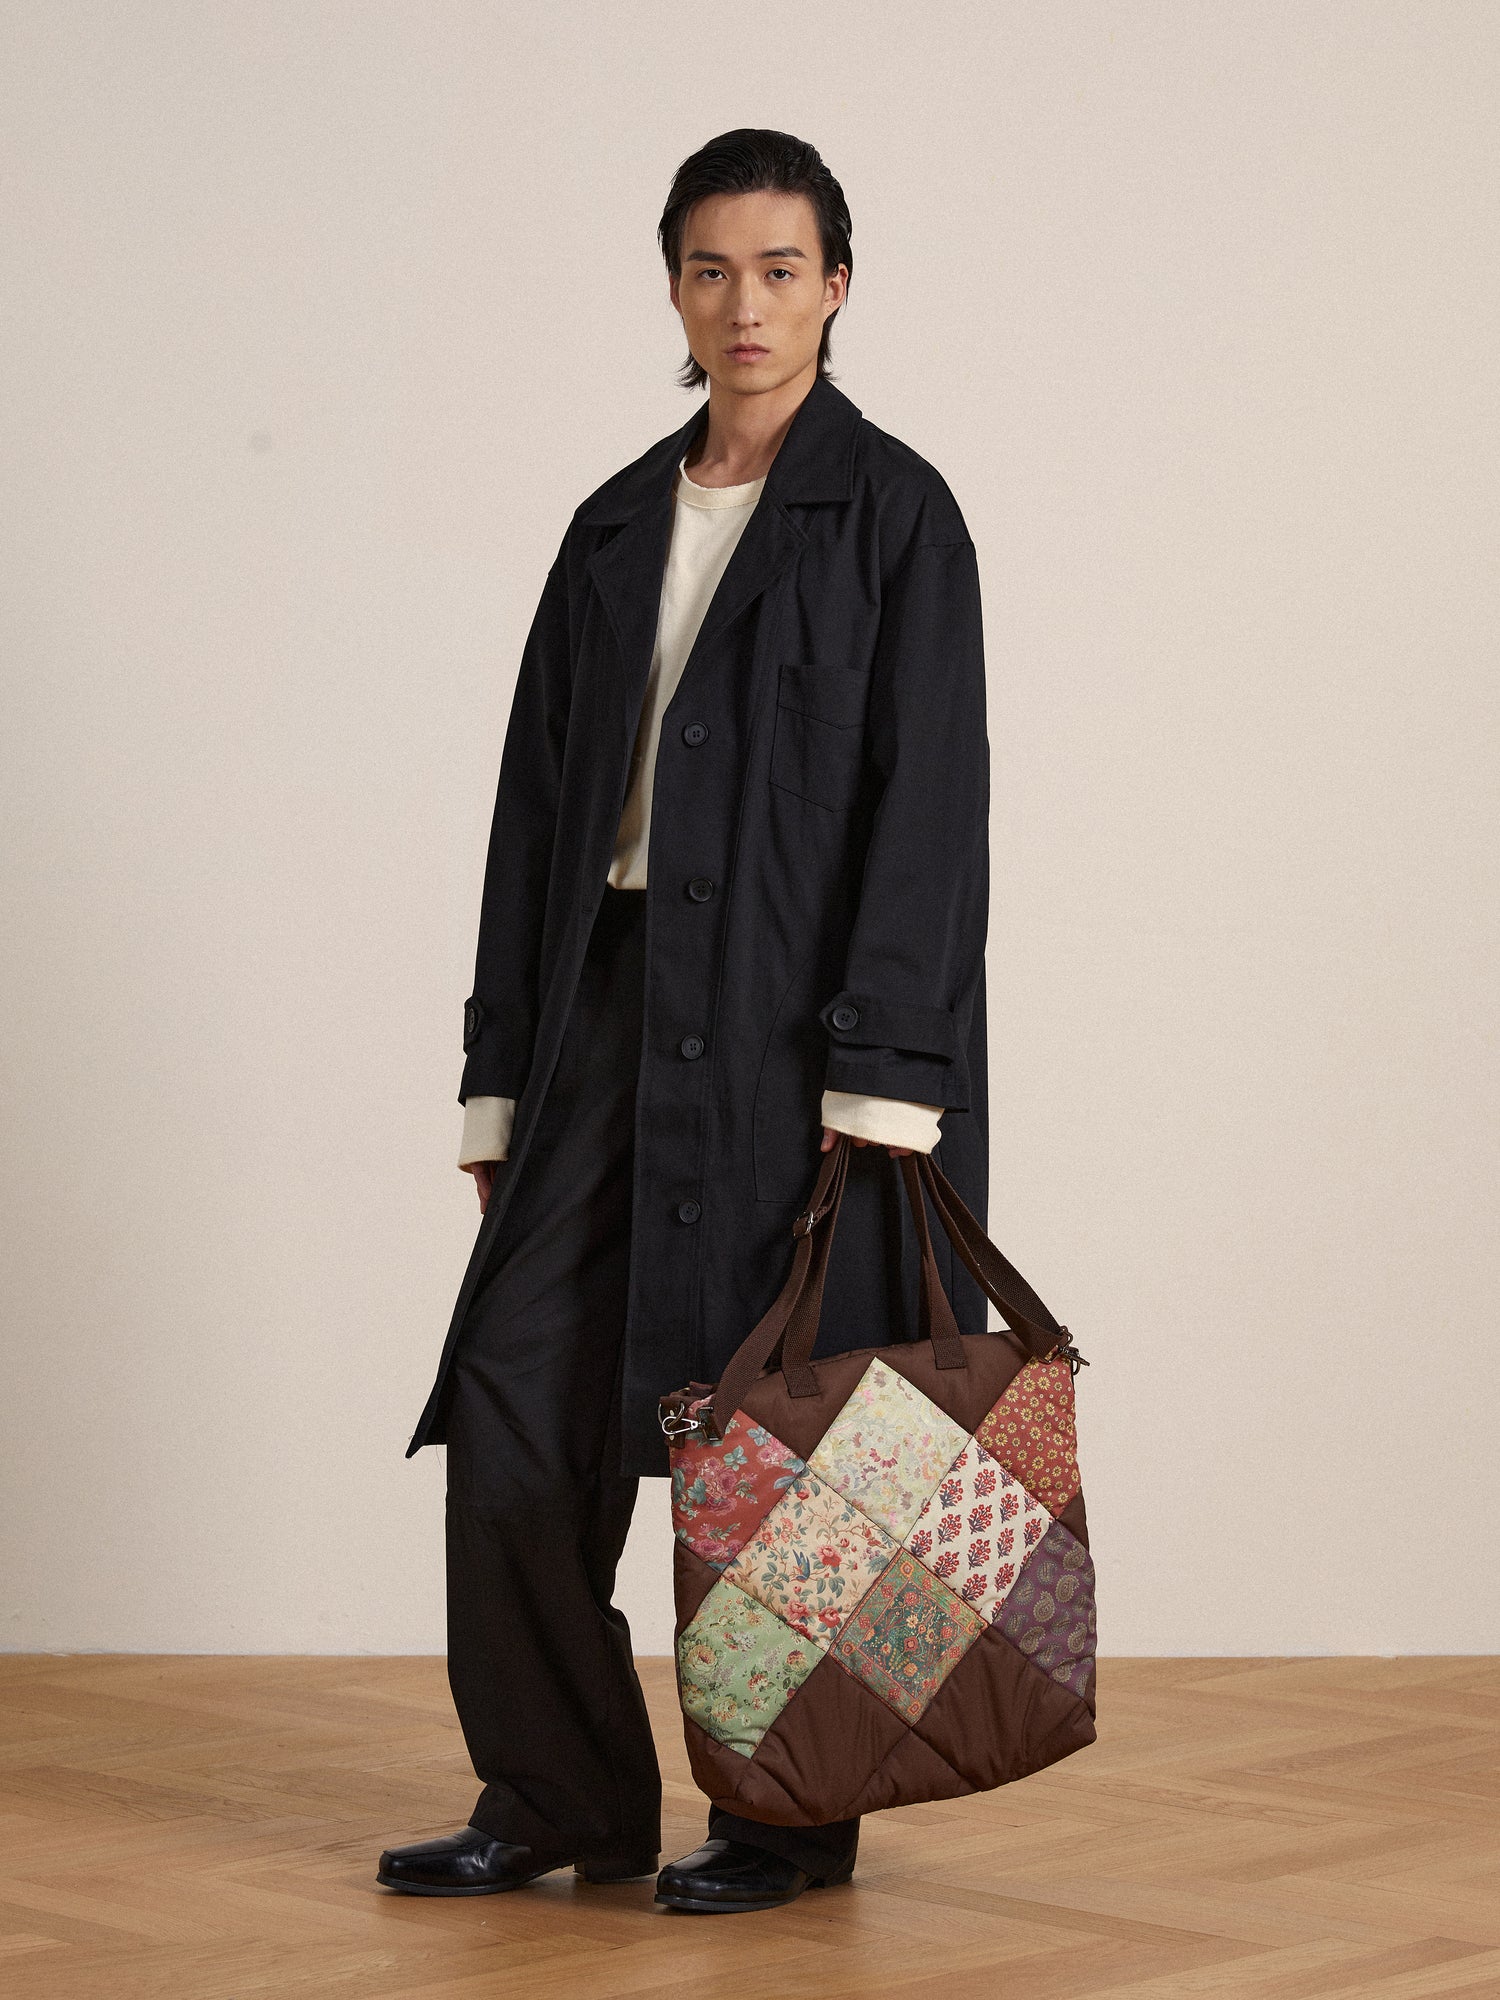 A man in a black coat holding a Profound Parisa Quilted Tapestry Bag.